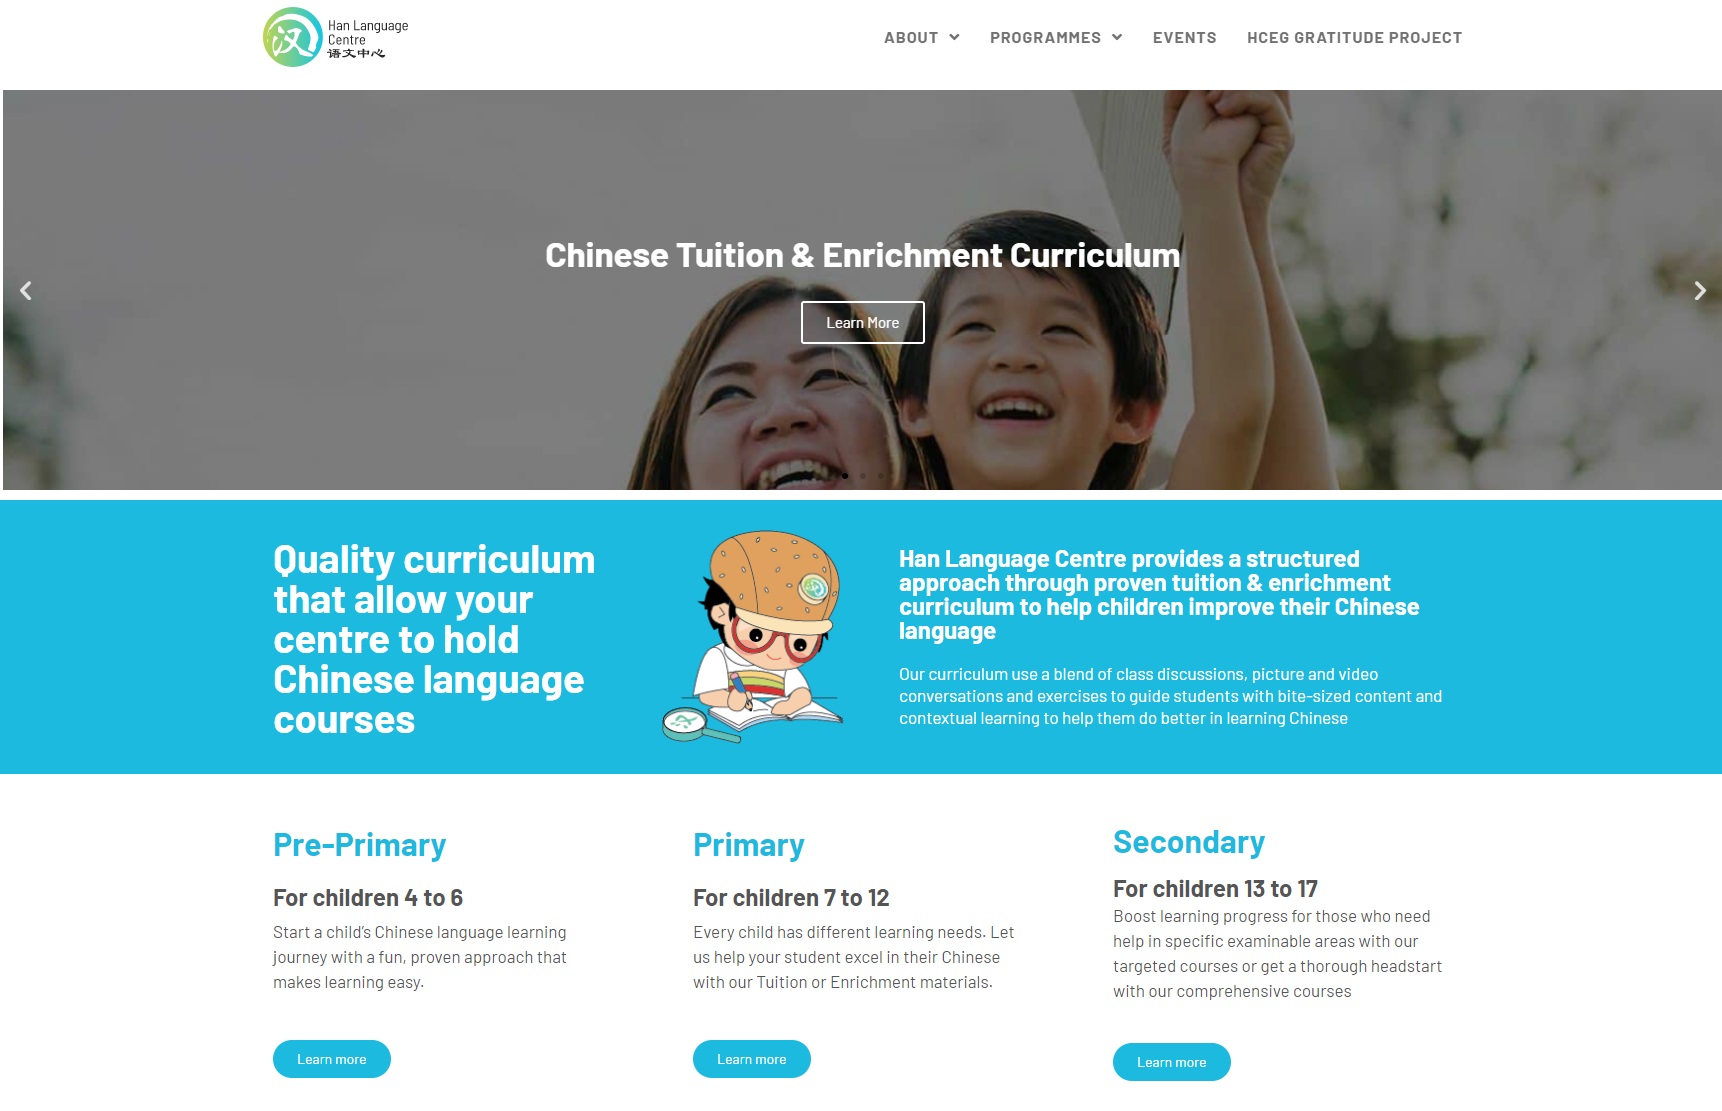 Han-Language-Centre-Chinese-Tuition